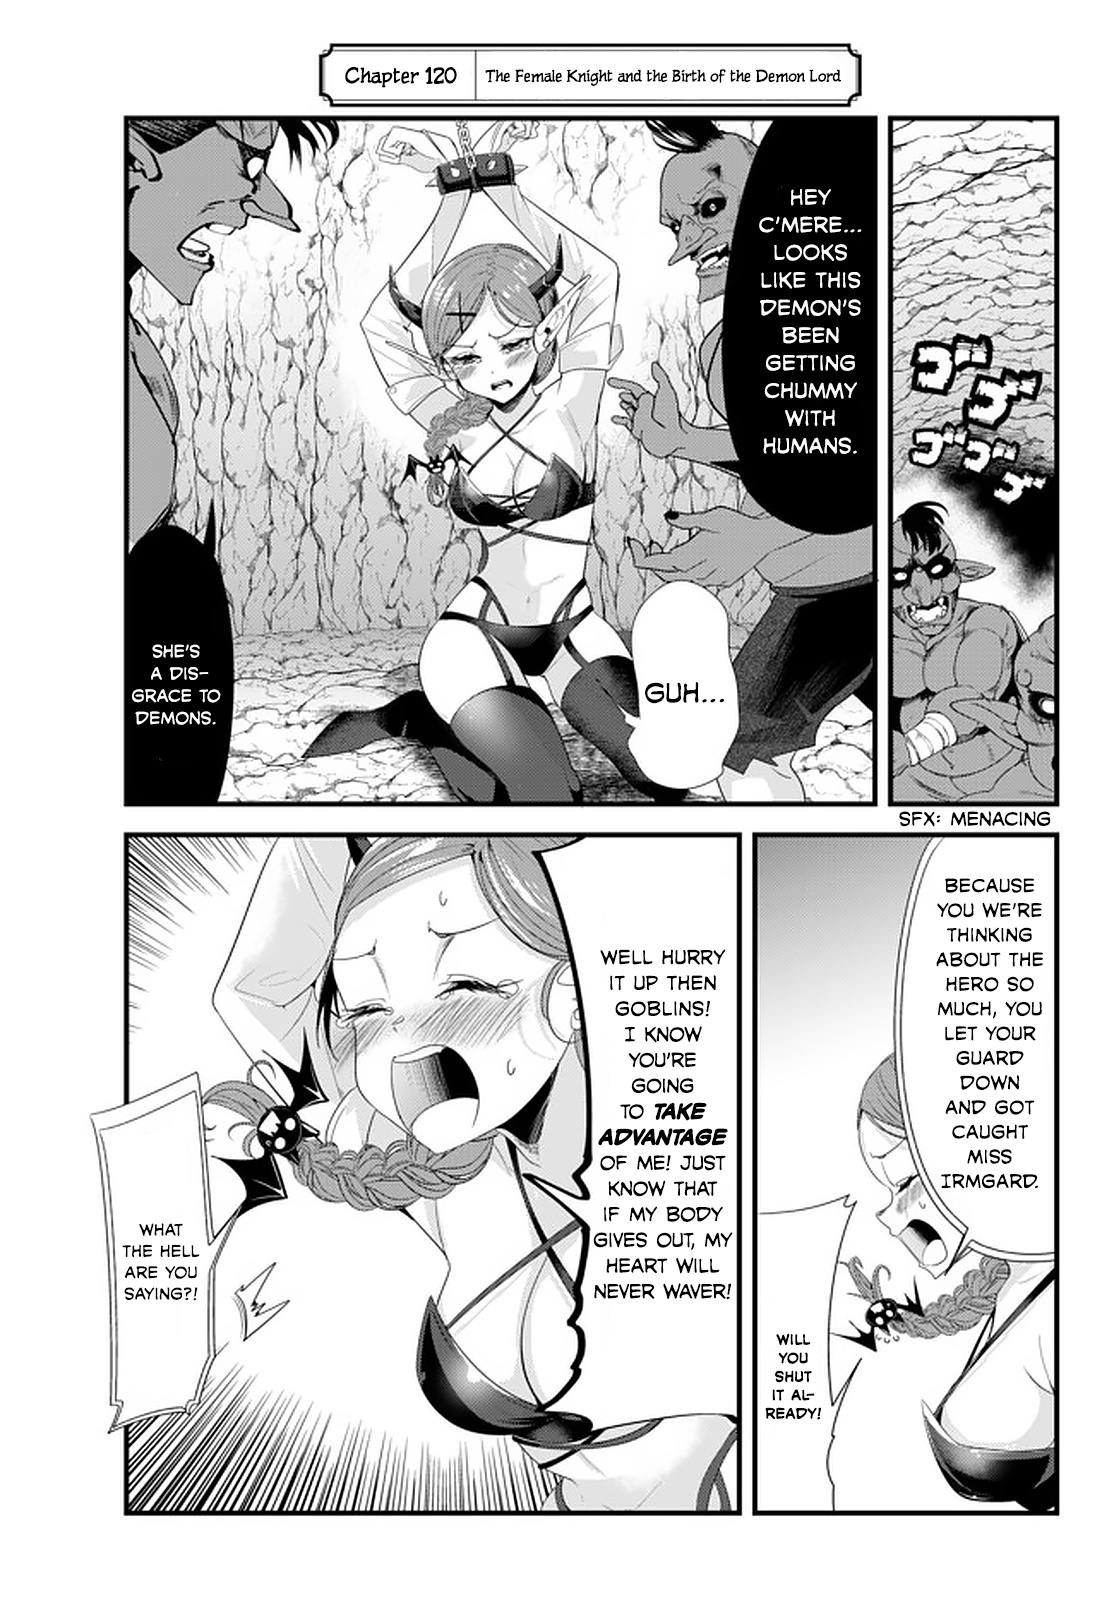 A Story About Treating a Female Knight, Who Has Never Been Treated as a Woman, as a Woman - Chapter 120 Page 1